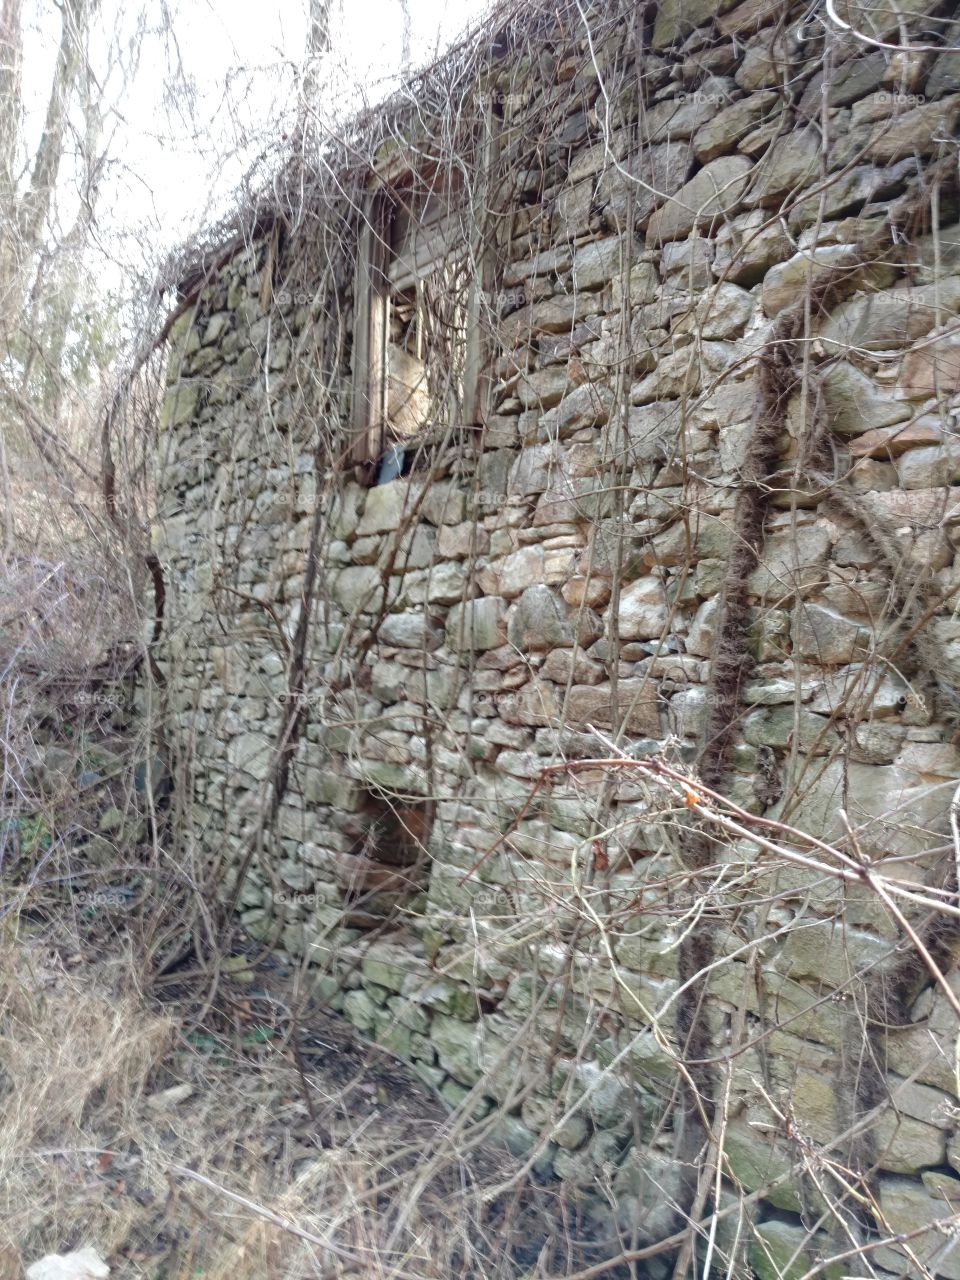 Old stone house